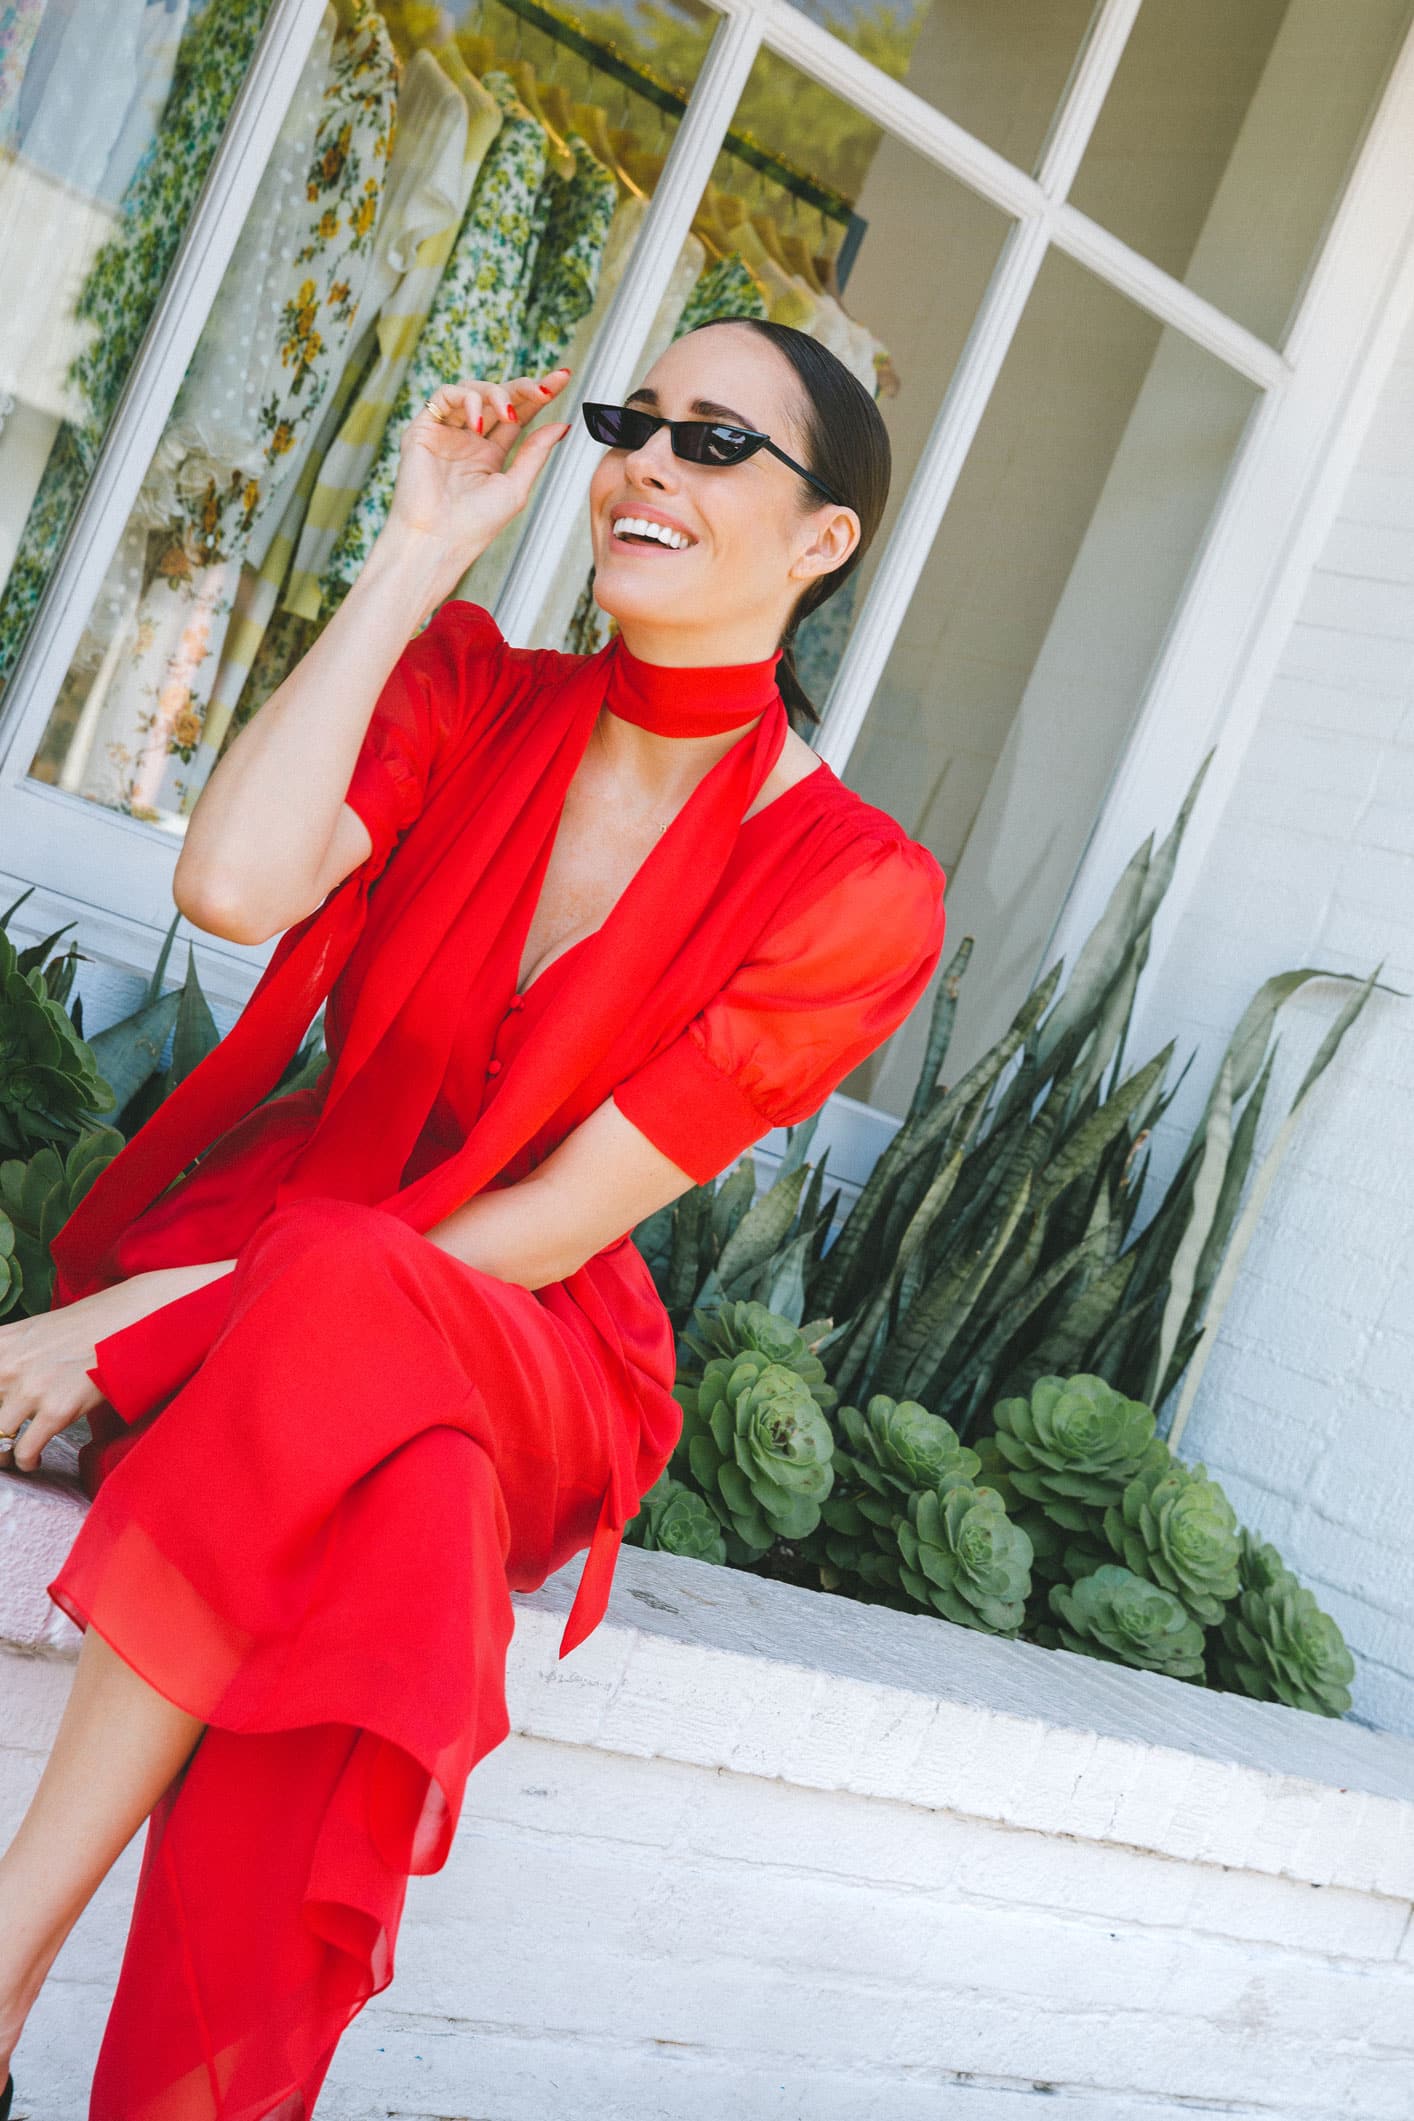 Louise Roe Wearing Red Beulah Jumpsuit Shares Blogging Tips and Career Advice